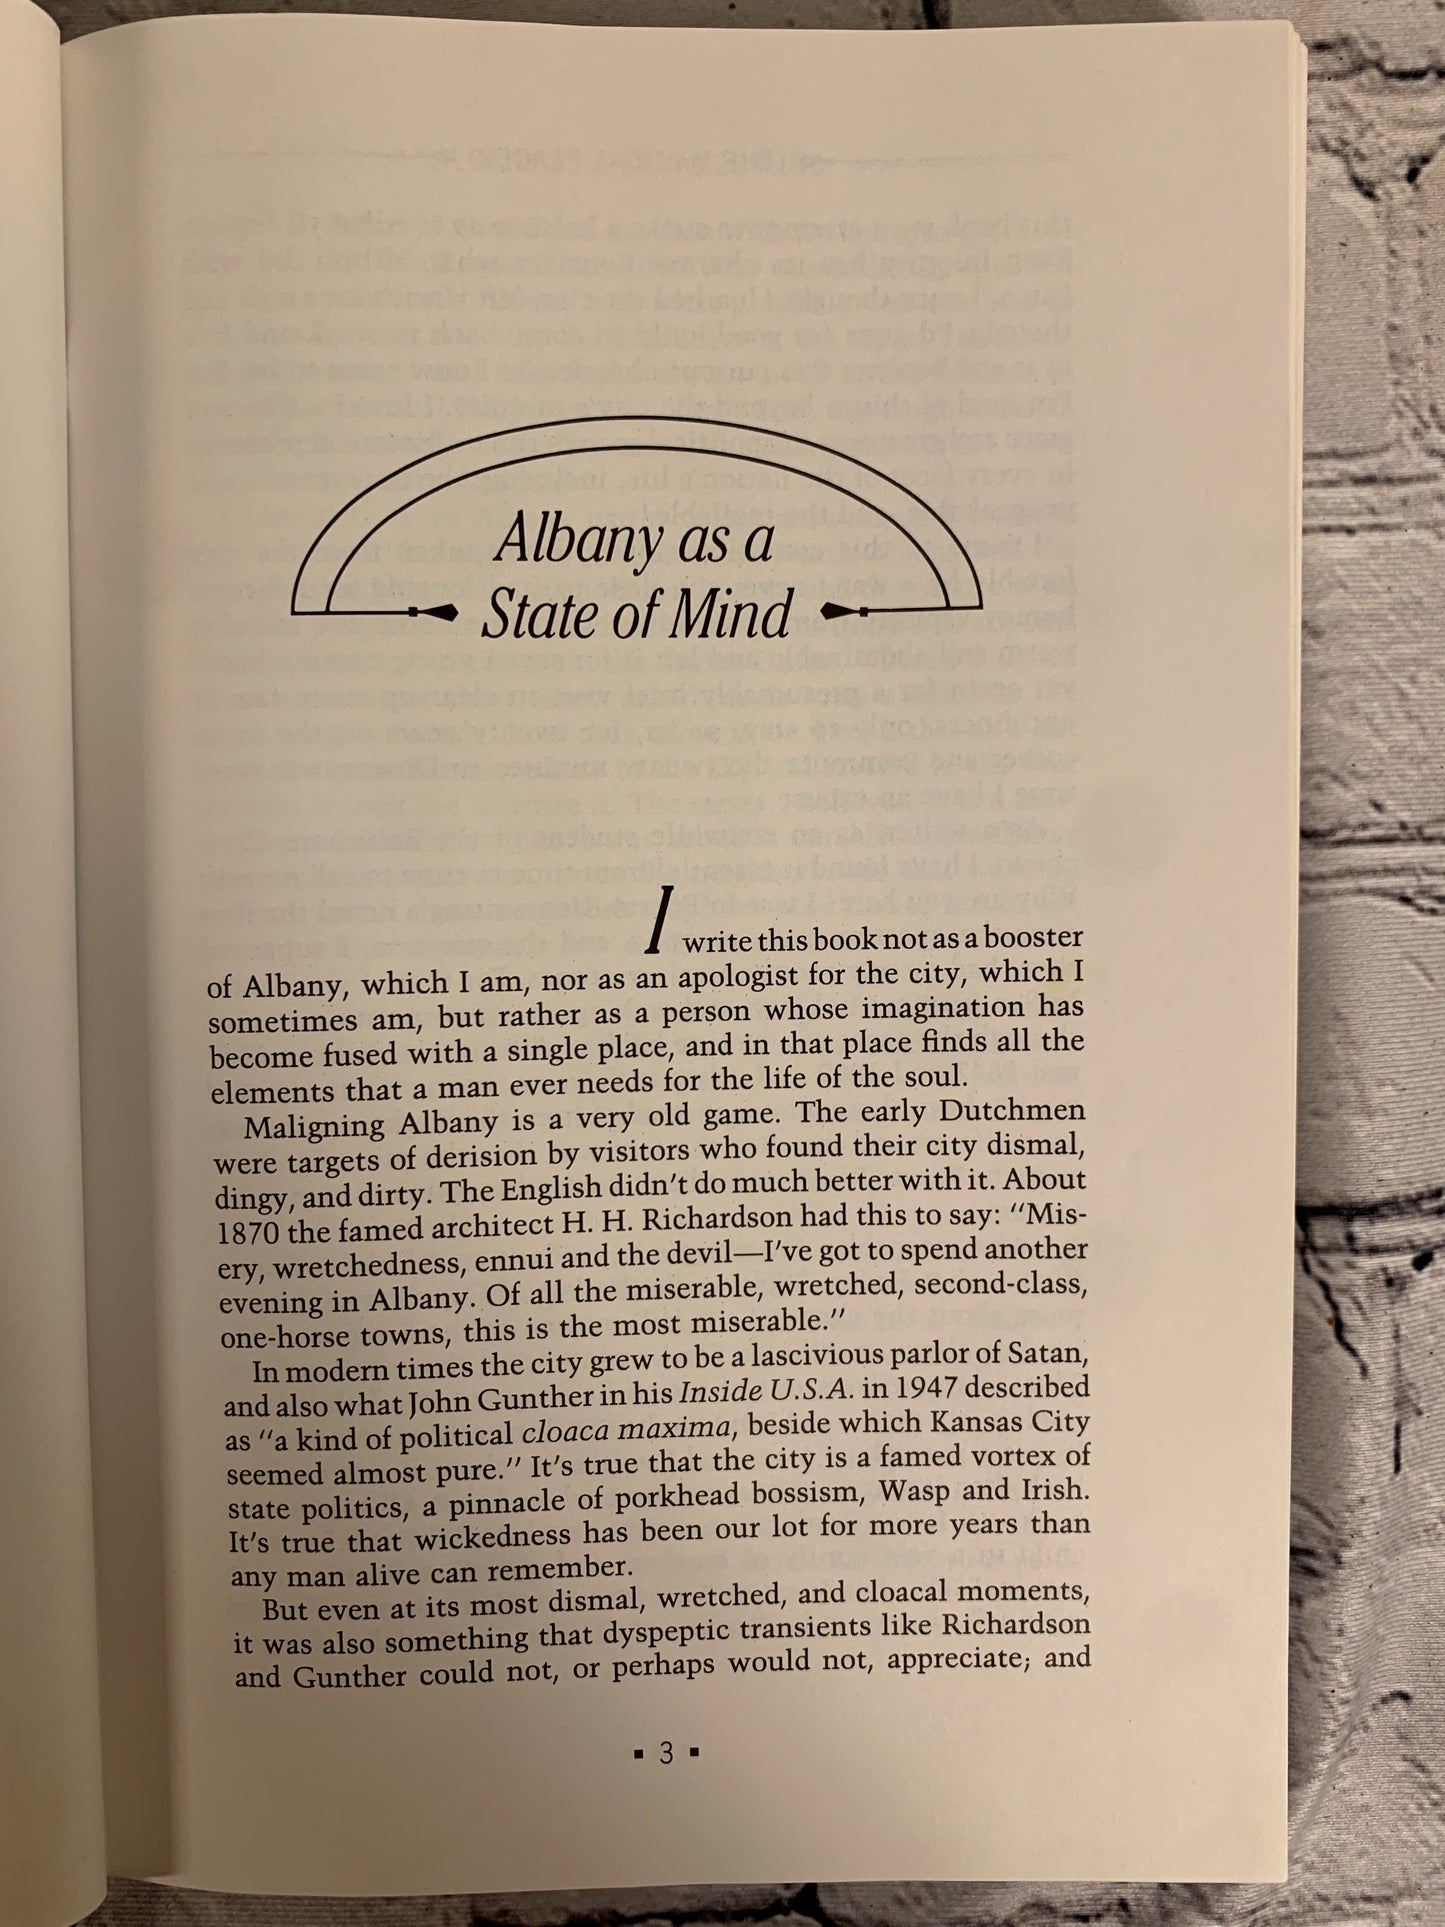 Quinn's Book by William Kennedy [1988]